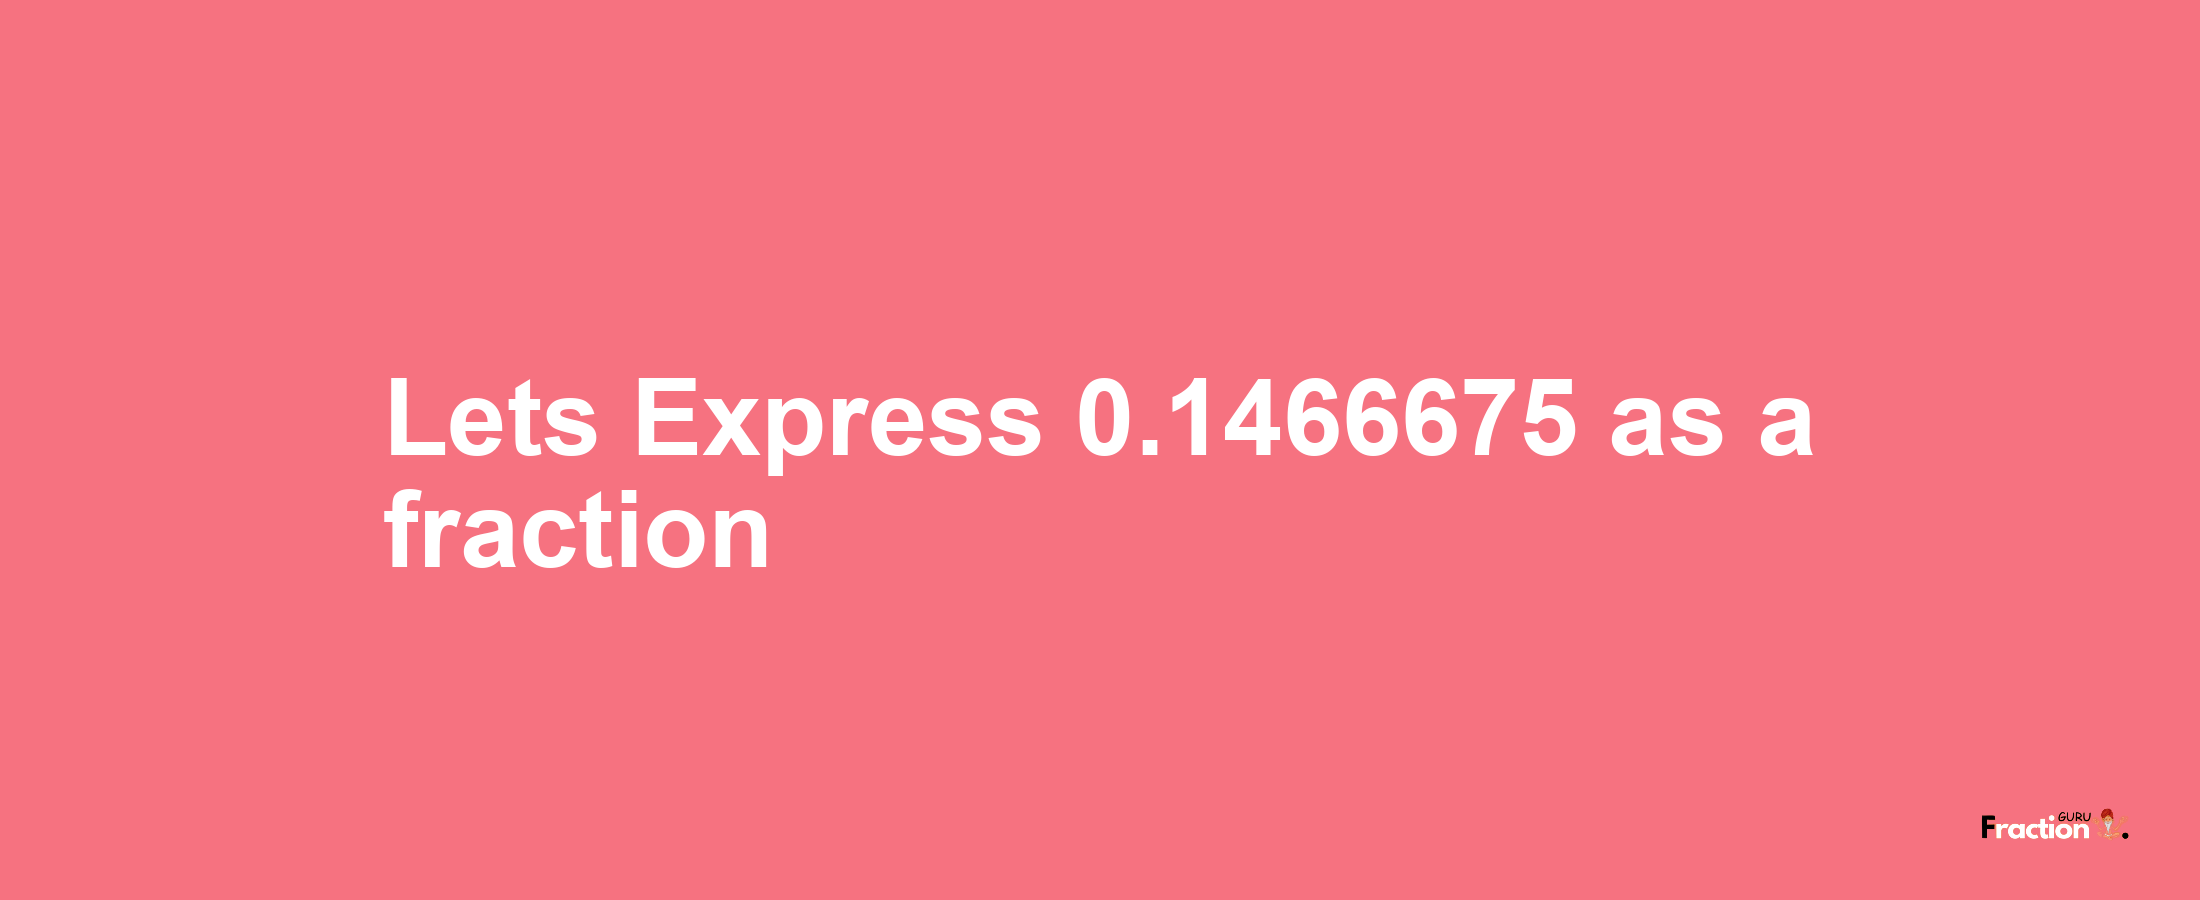 Lets Express 0.1466675 as afraction